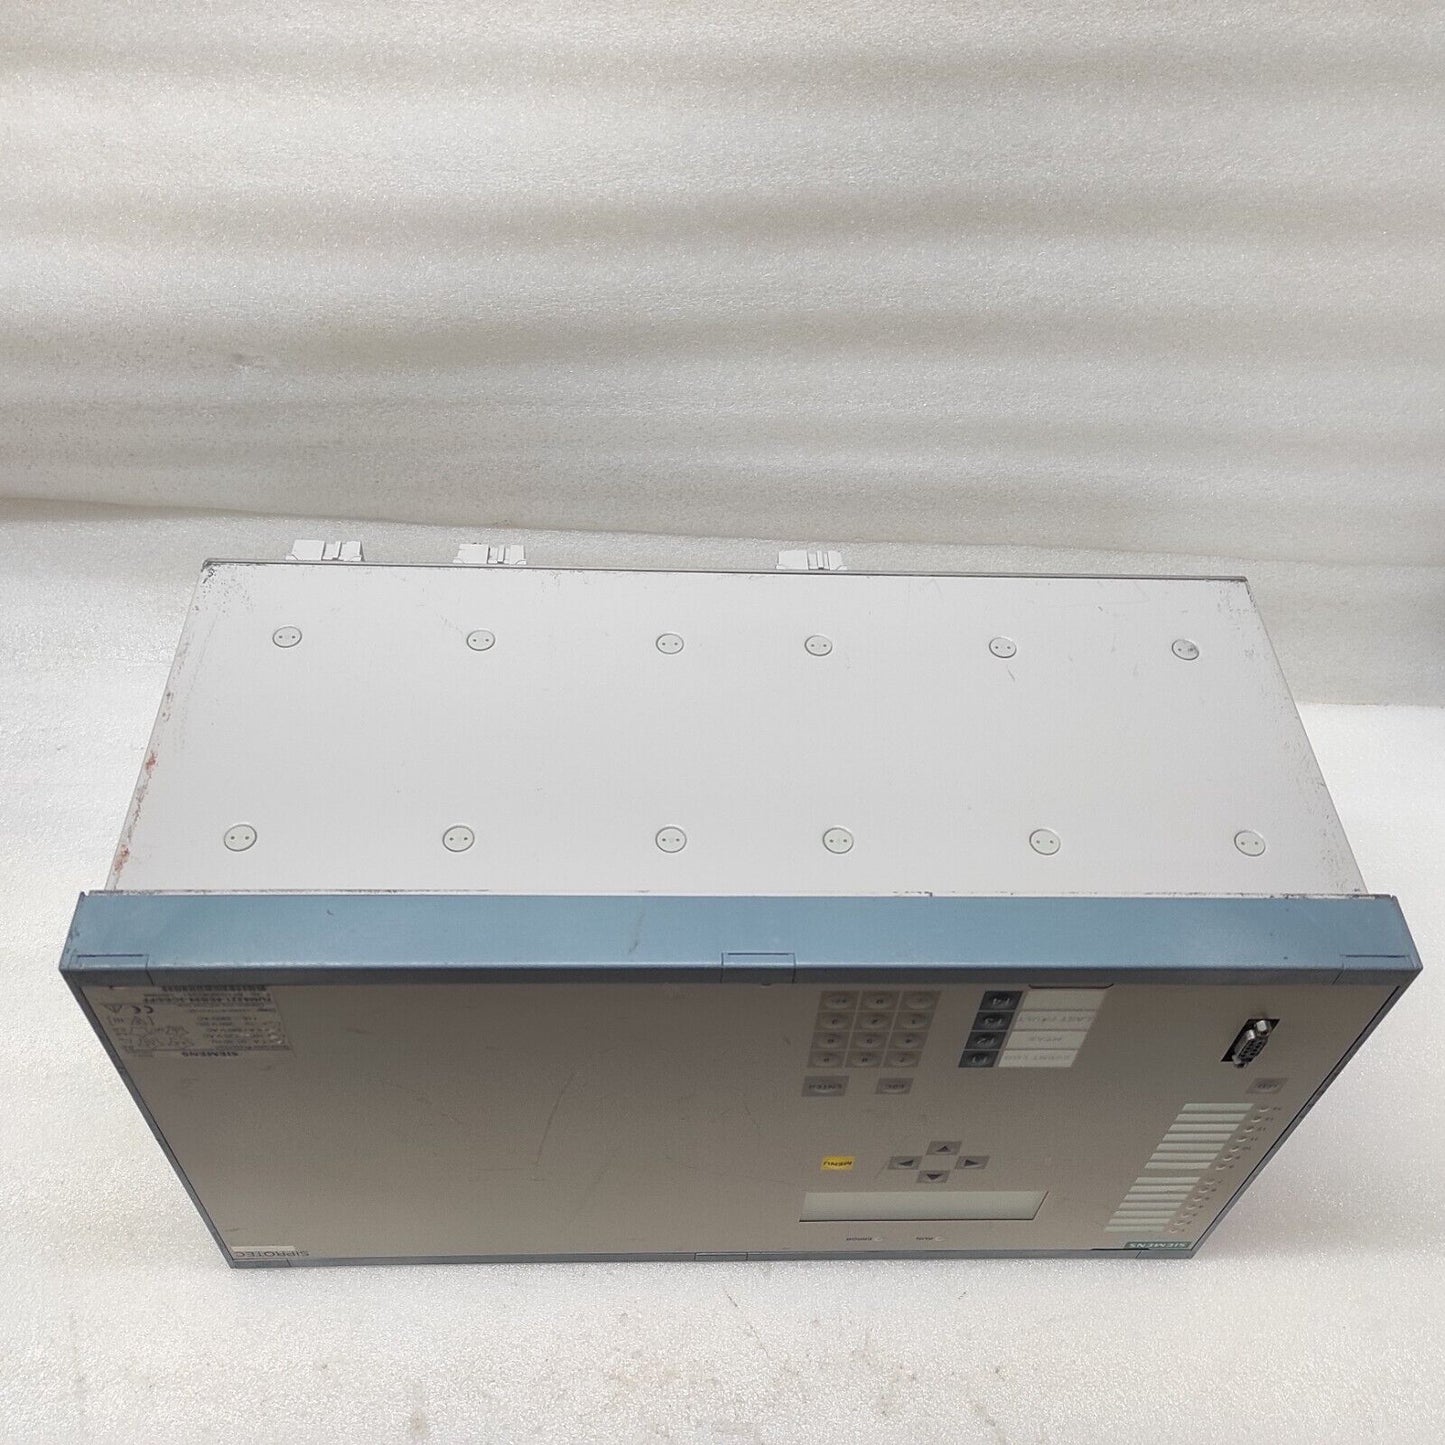 SIEMENS 7UM6221-5EB99-3CE0/FF SIPROTEC GENERATOR PROTECTION RELAY